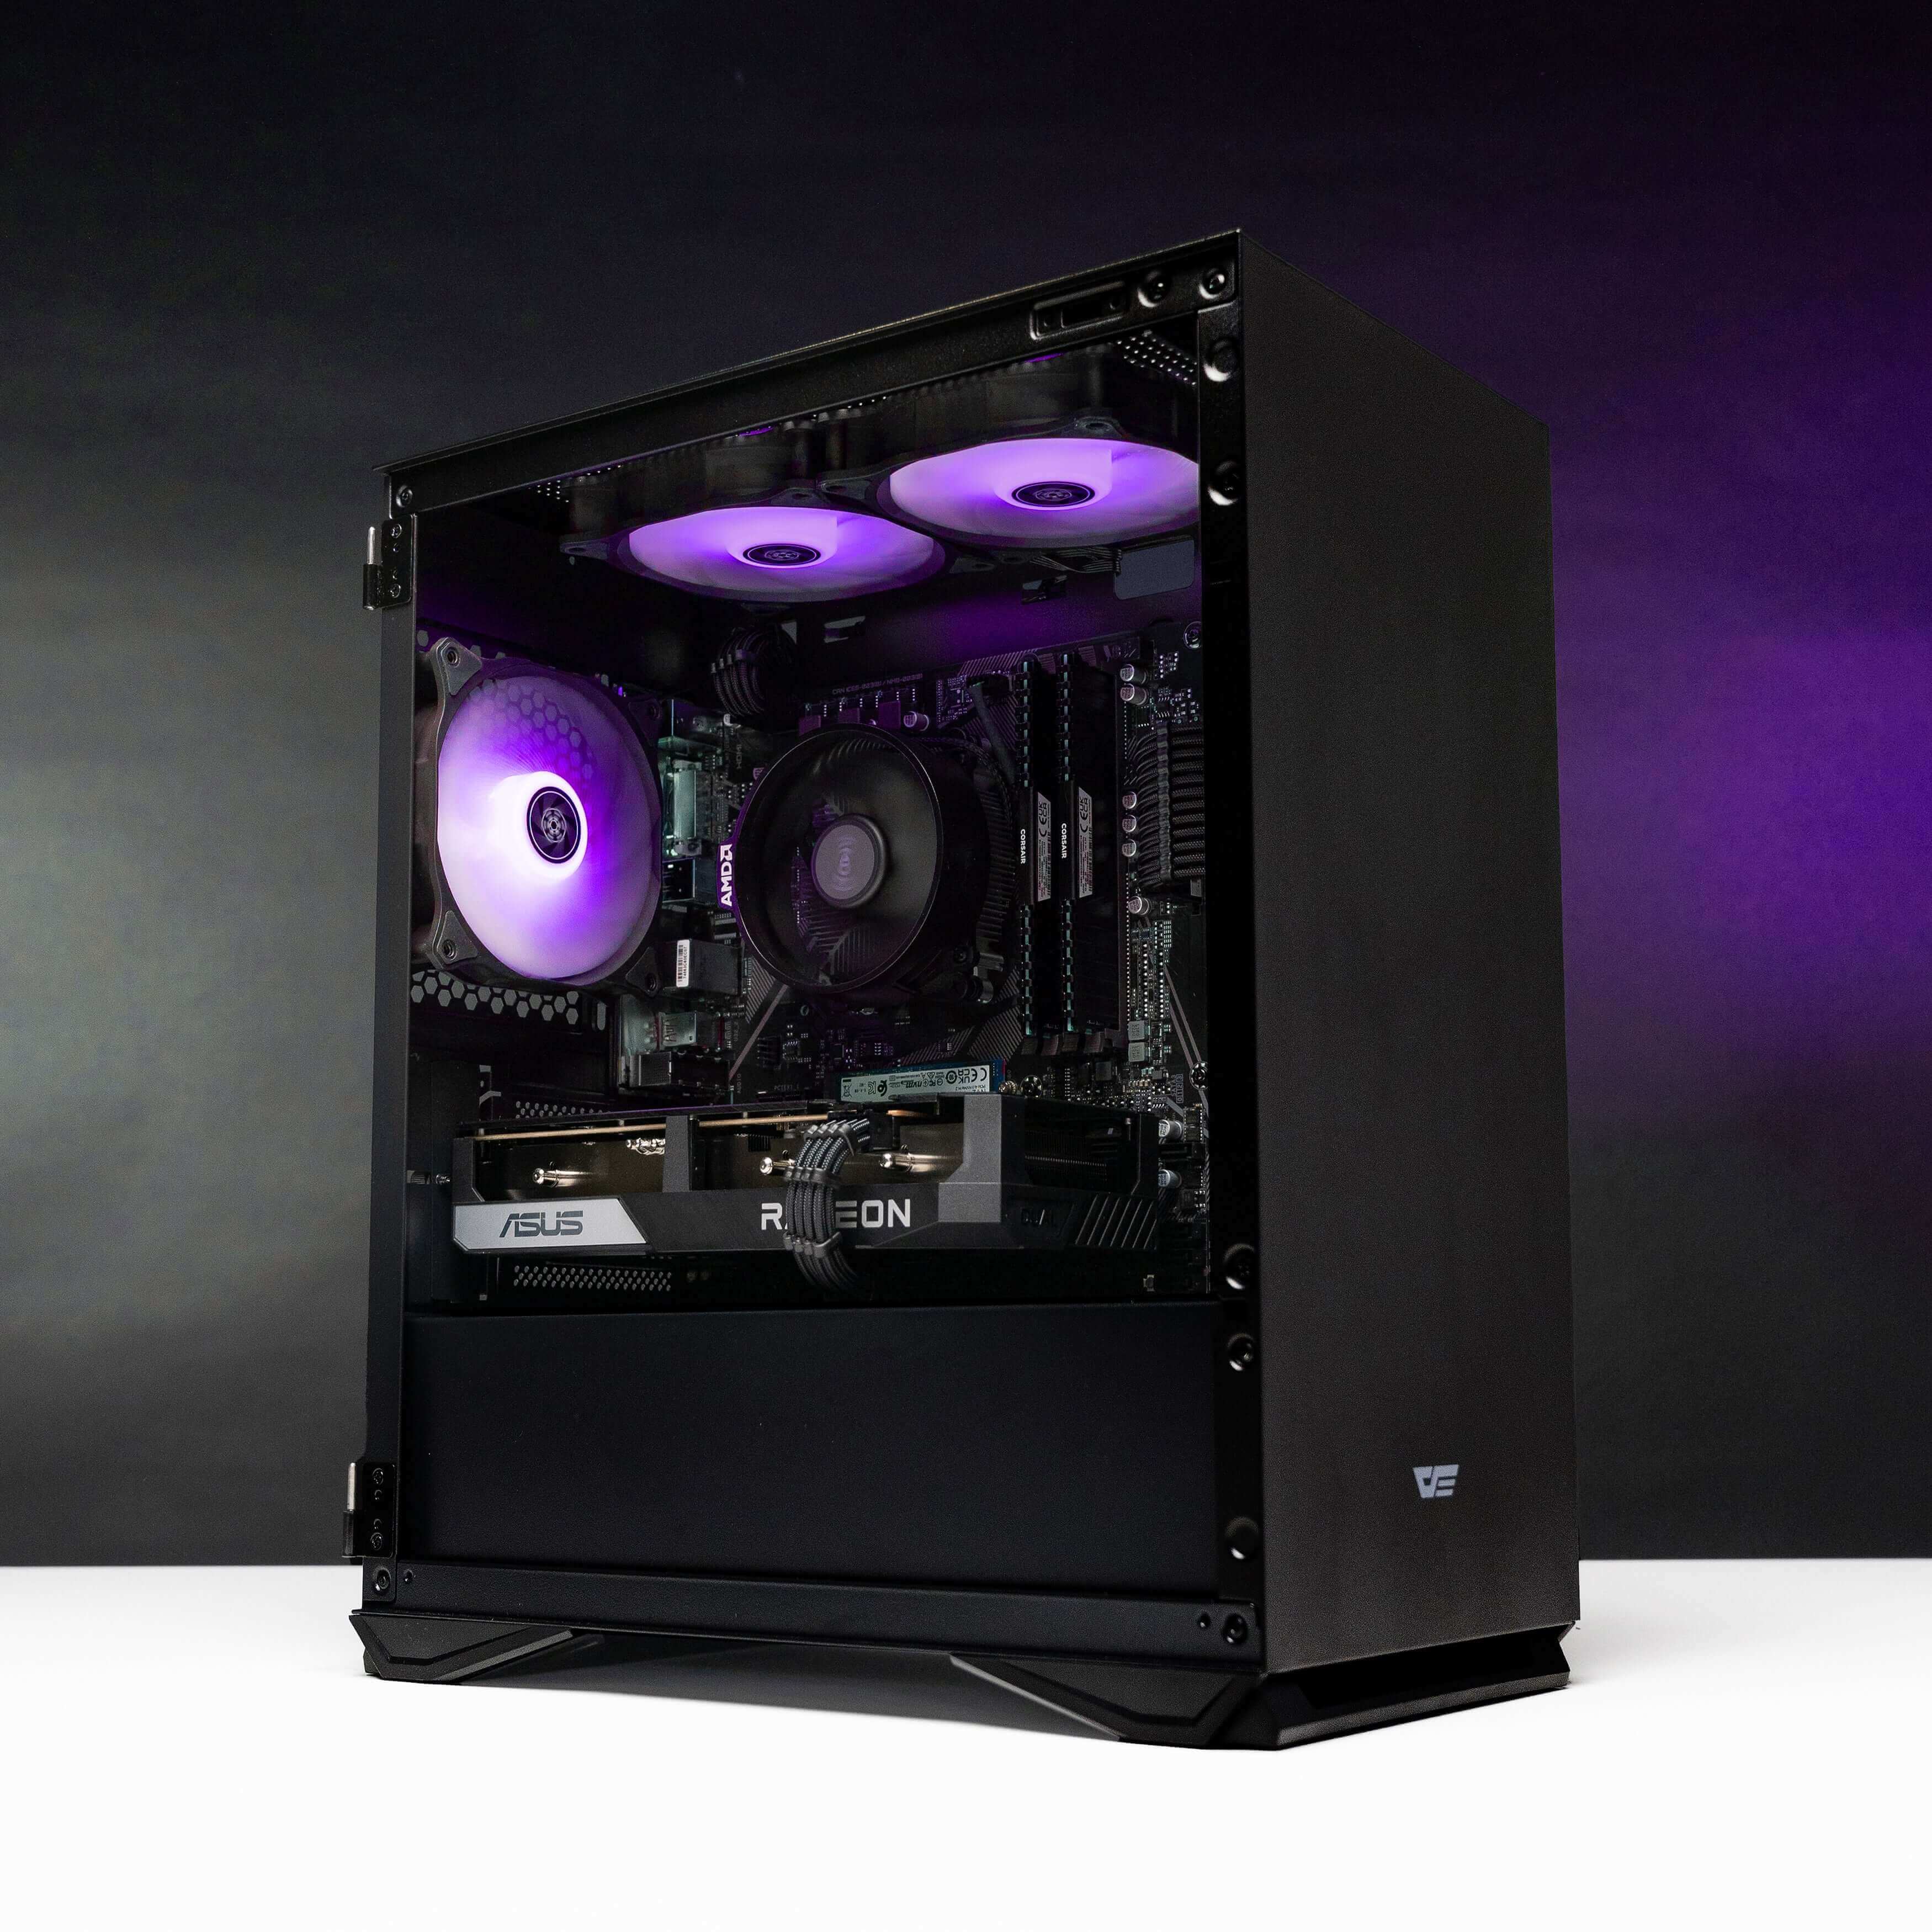 Side view of the impressive ARROW: LVL 4 Gaming PC showcasing its powerful components